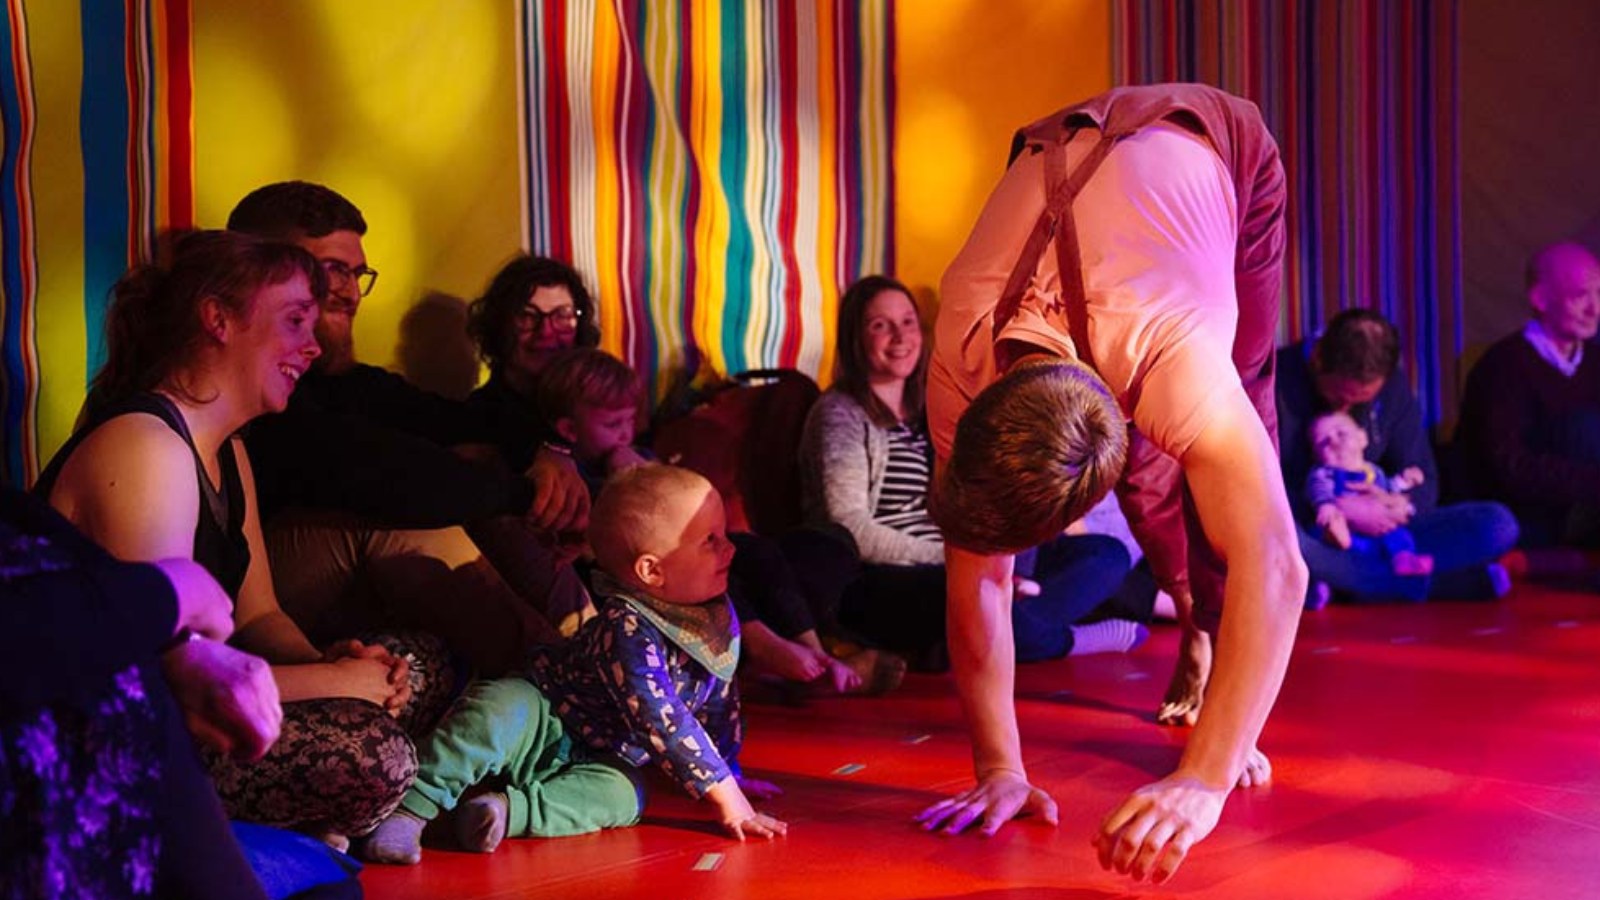 A performer folds over in front of a small child at a Starcatchers performance